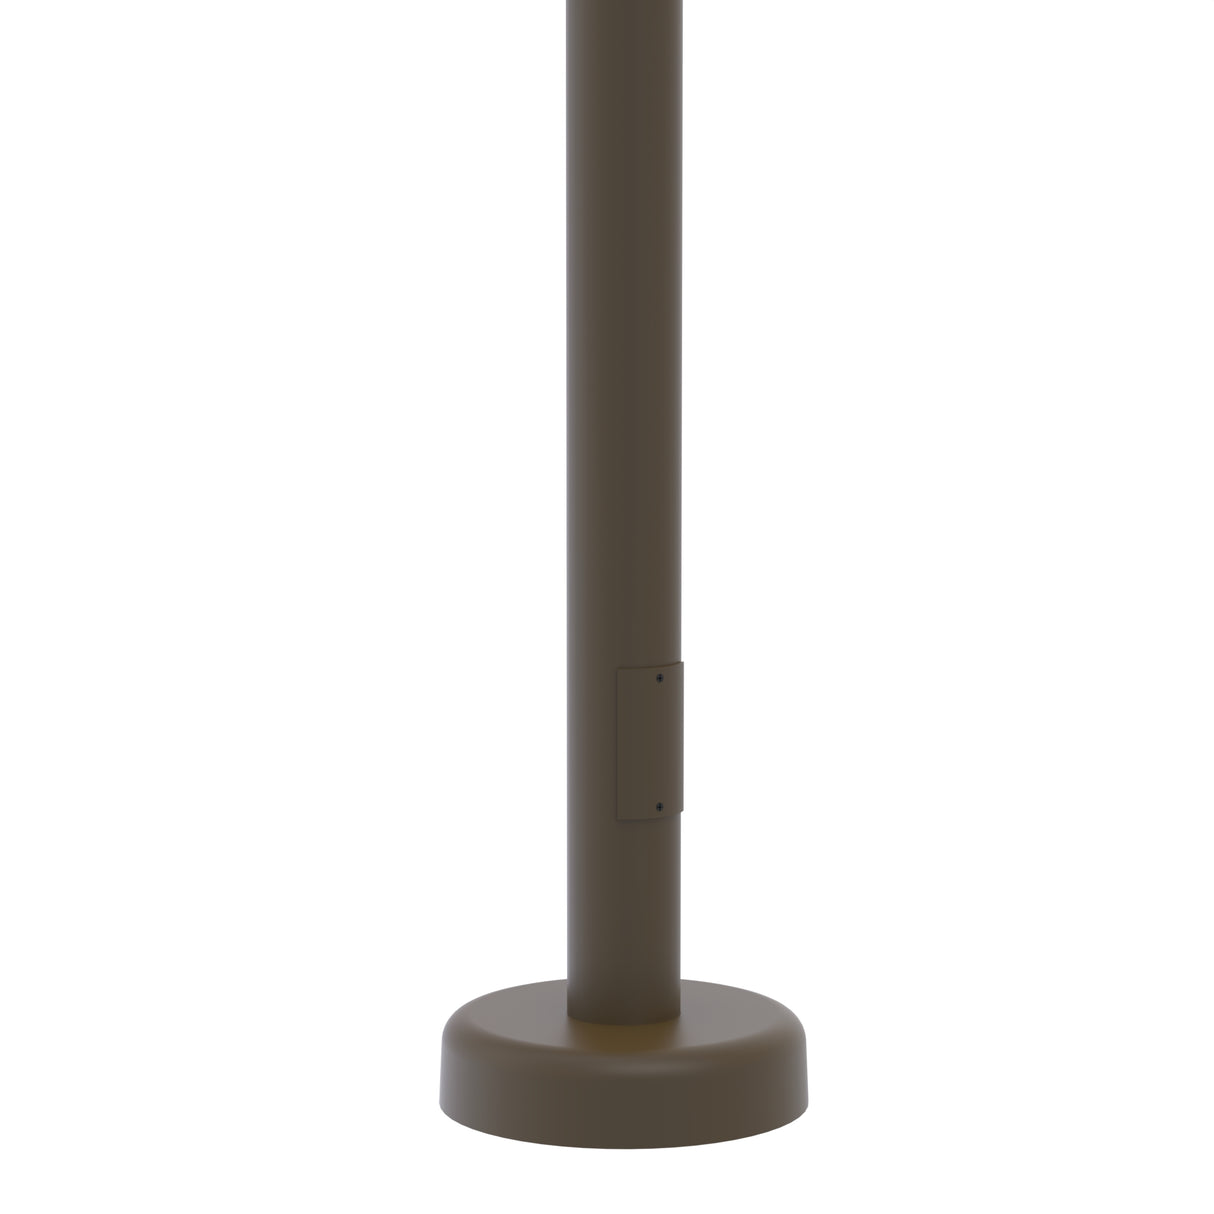 16' Tall x 4.0" OD x 0.125" Thick, Round Straight Aluminum, Hinged Anchor Base Light Pole